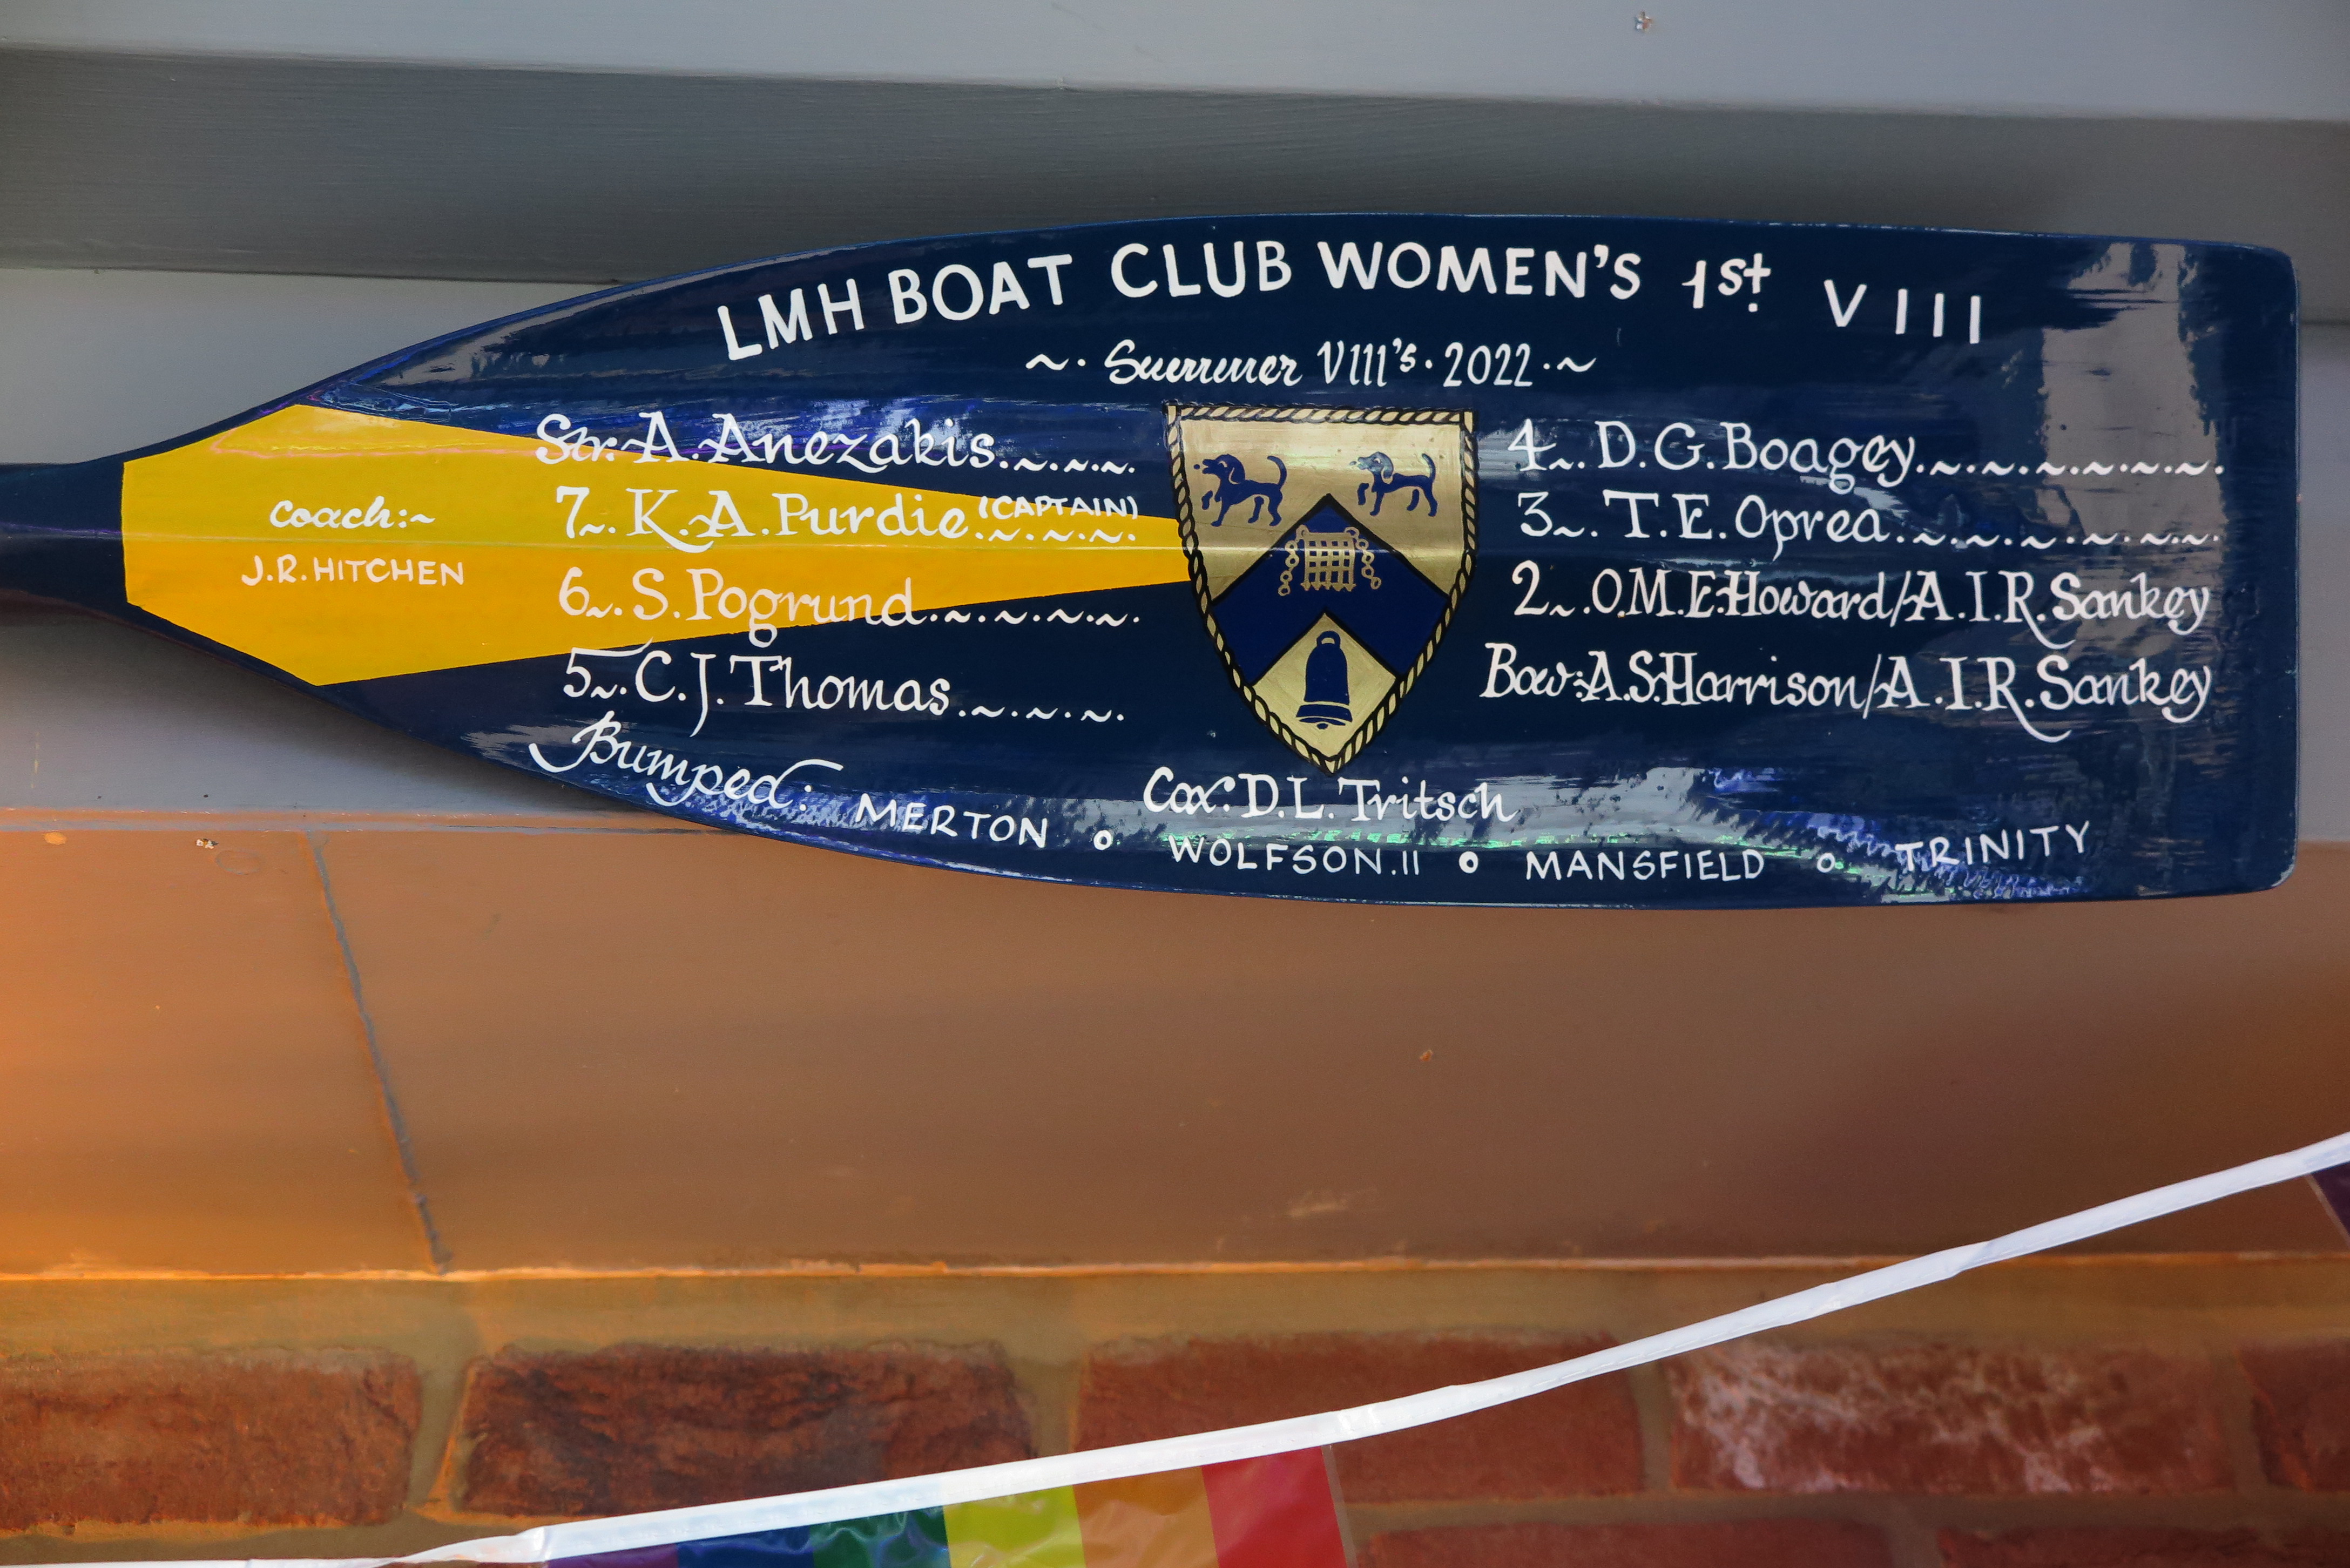 Close up of the blade of a rowing oar with hand painted text